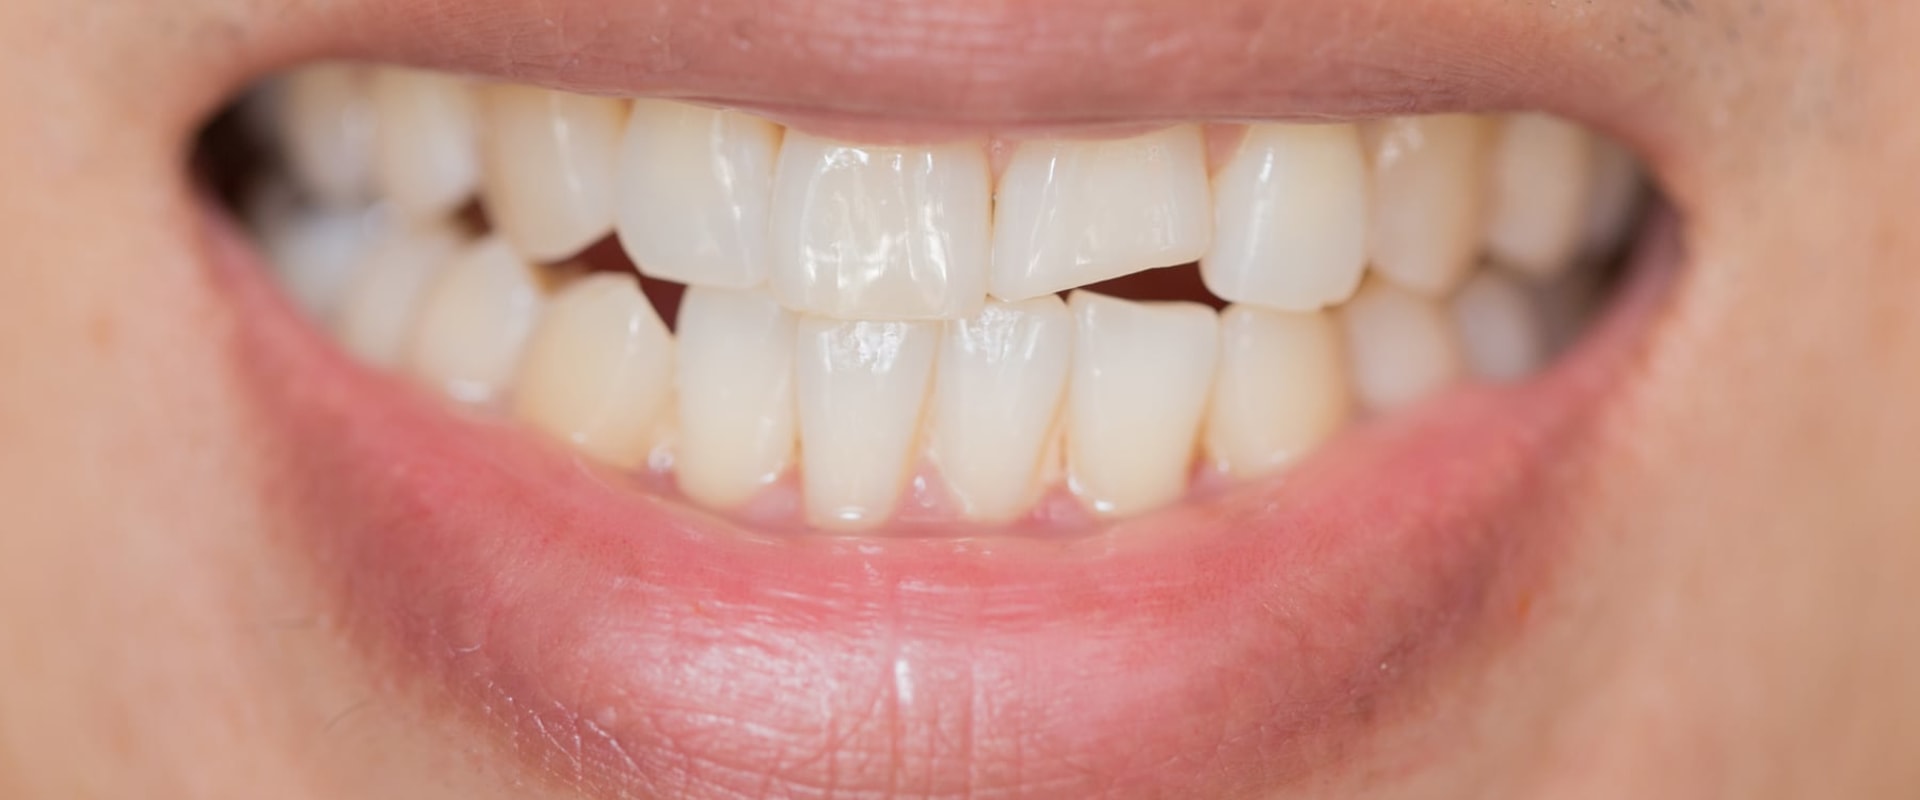 Can You Leave a Chipped Tooth for a Week? Expert Advice on What to Do